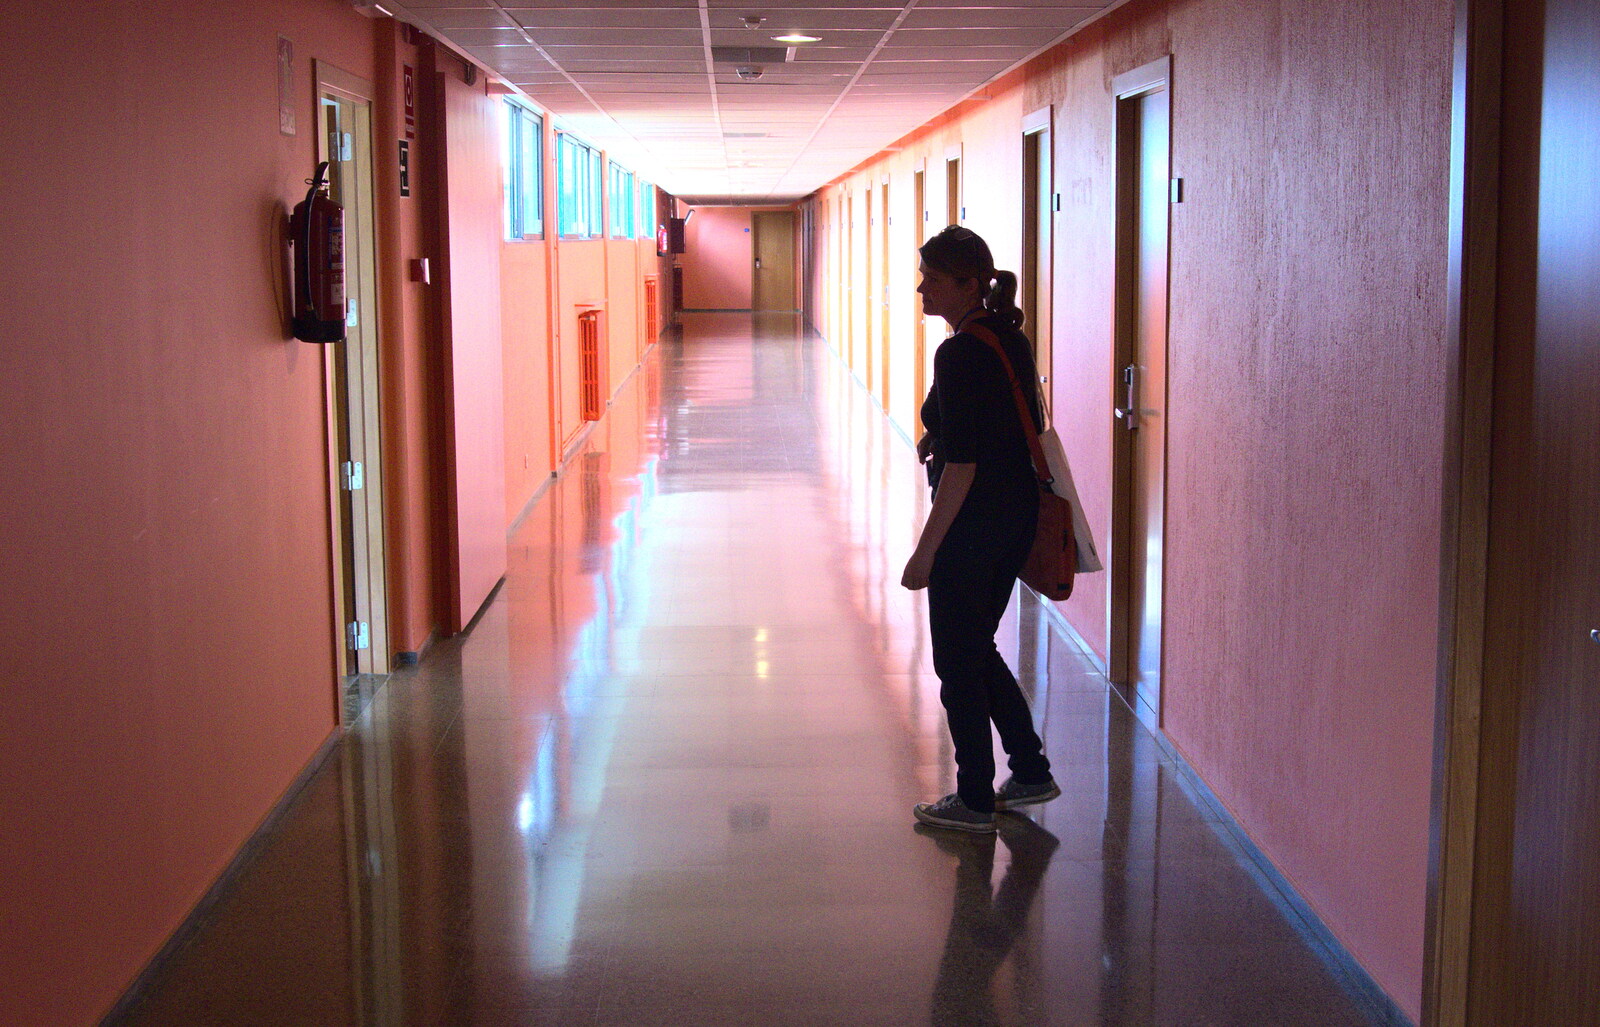 Isobel roams around our spartan accommodation block from The Open Education Challenge, Barcelona, Catalonia - 13th July 2014